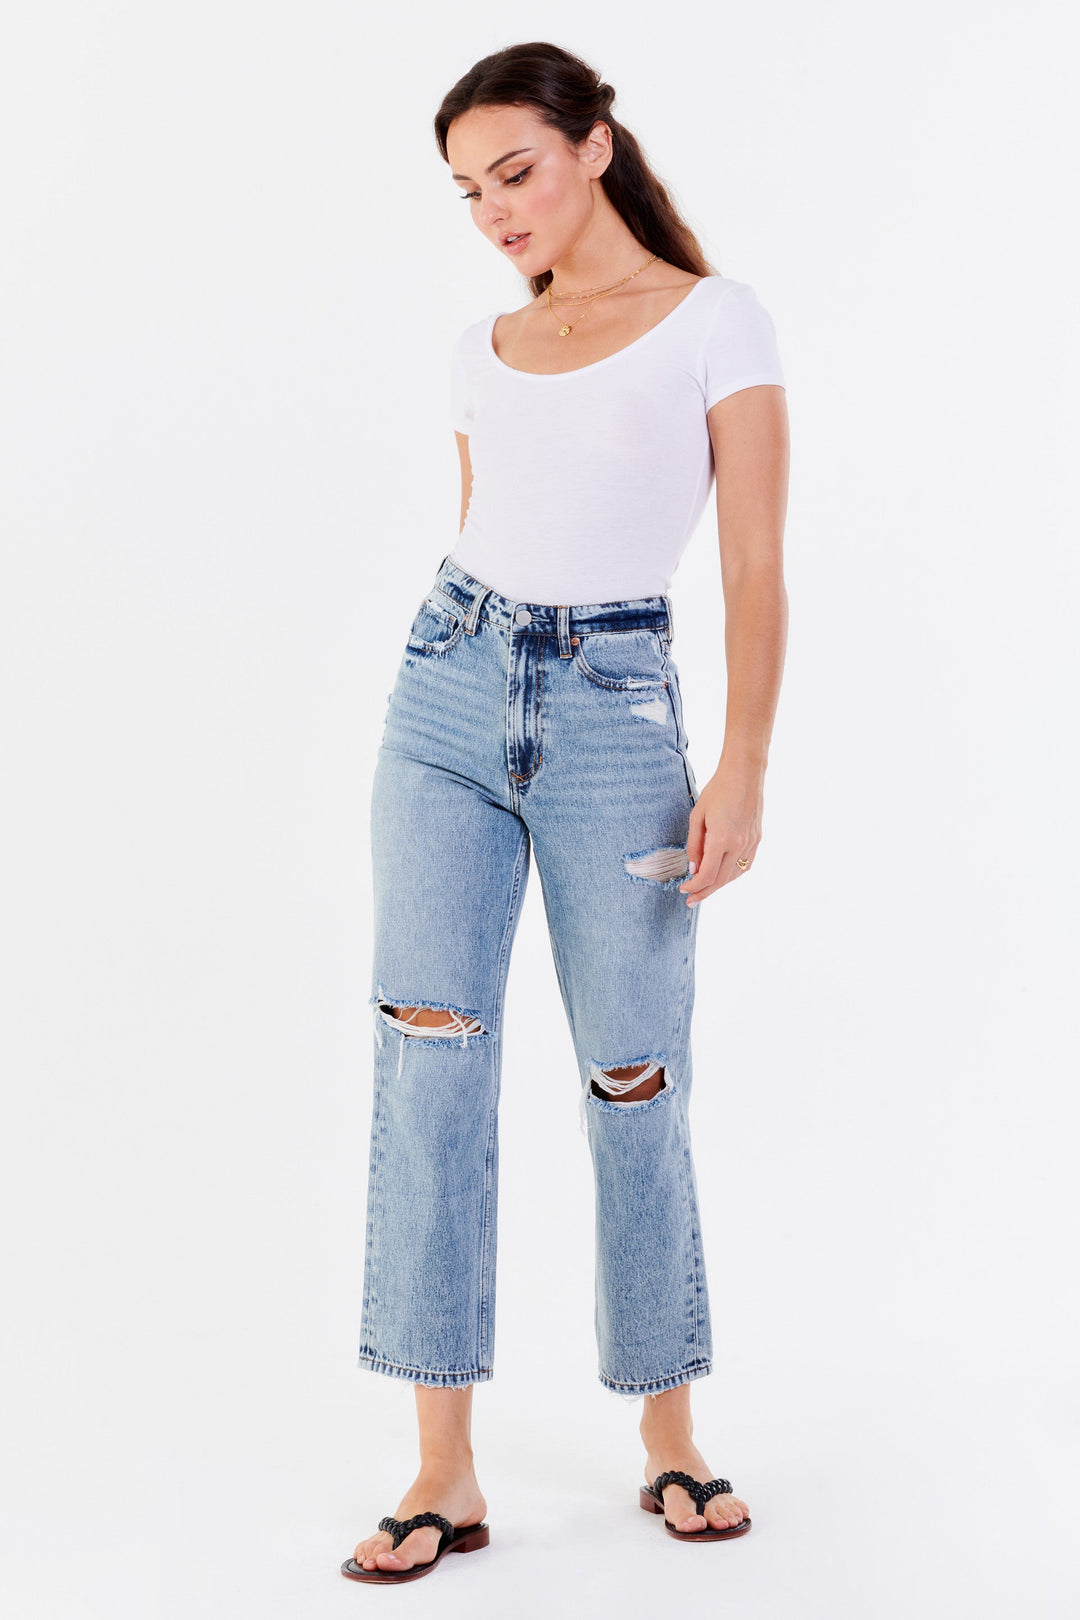 Denim Review: the 90s Ultra High Rise Straight Jeans from